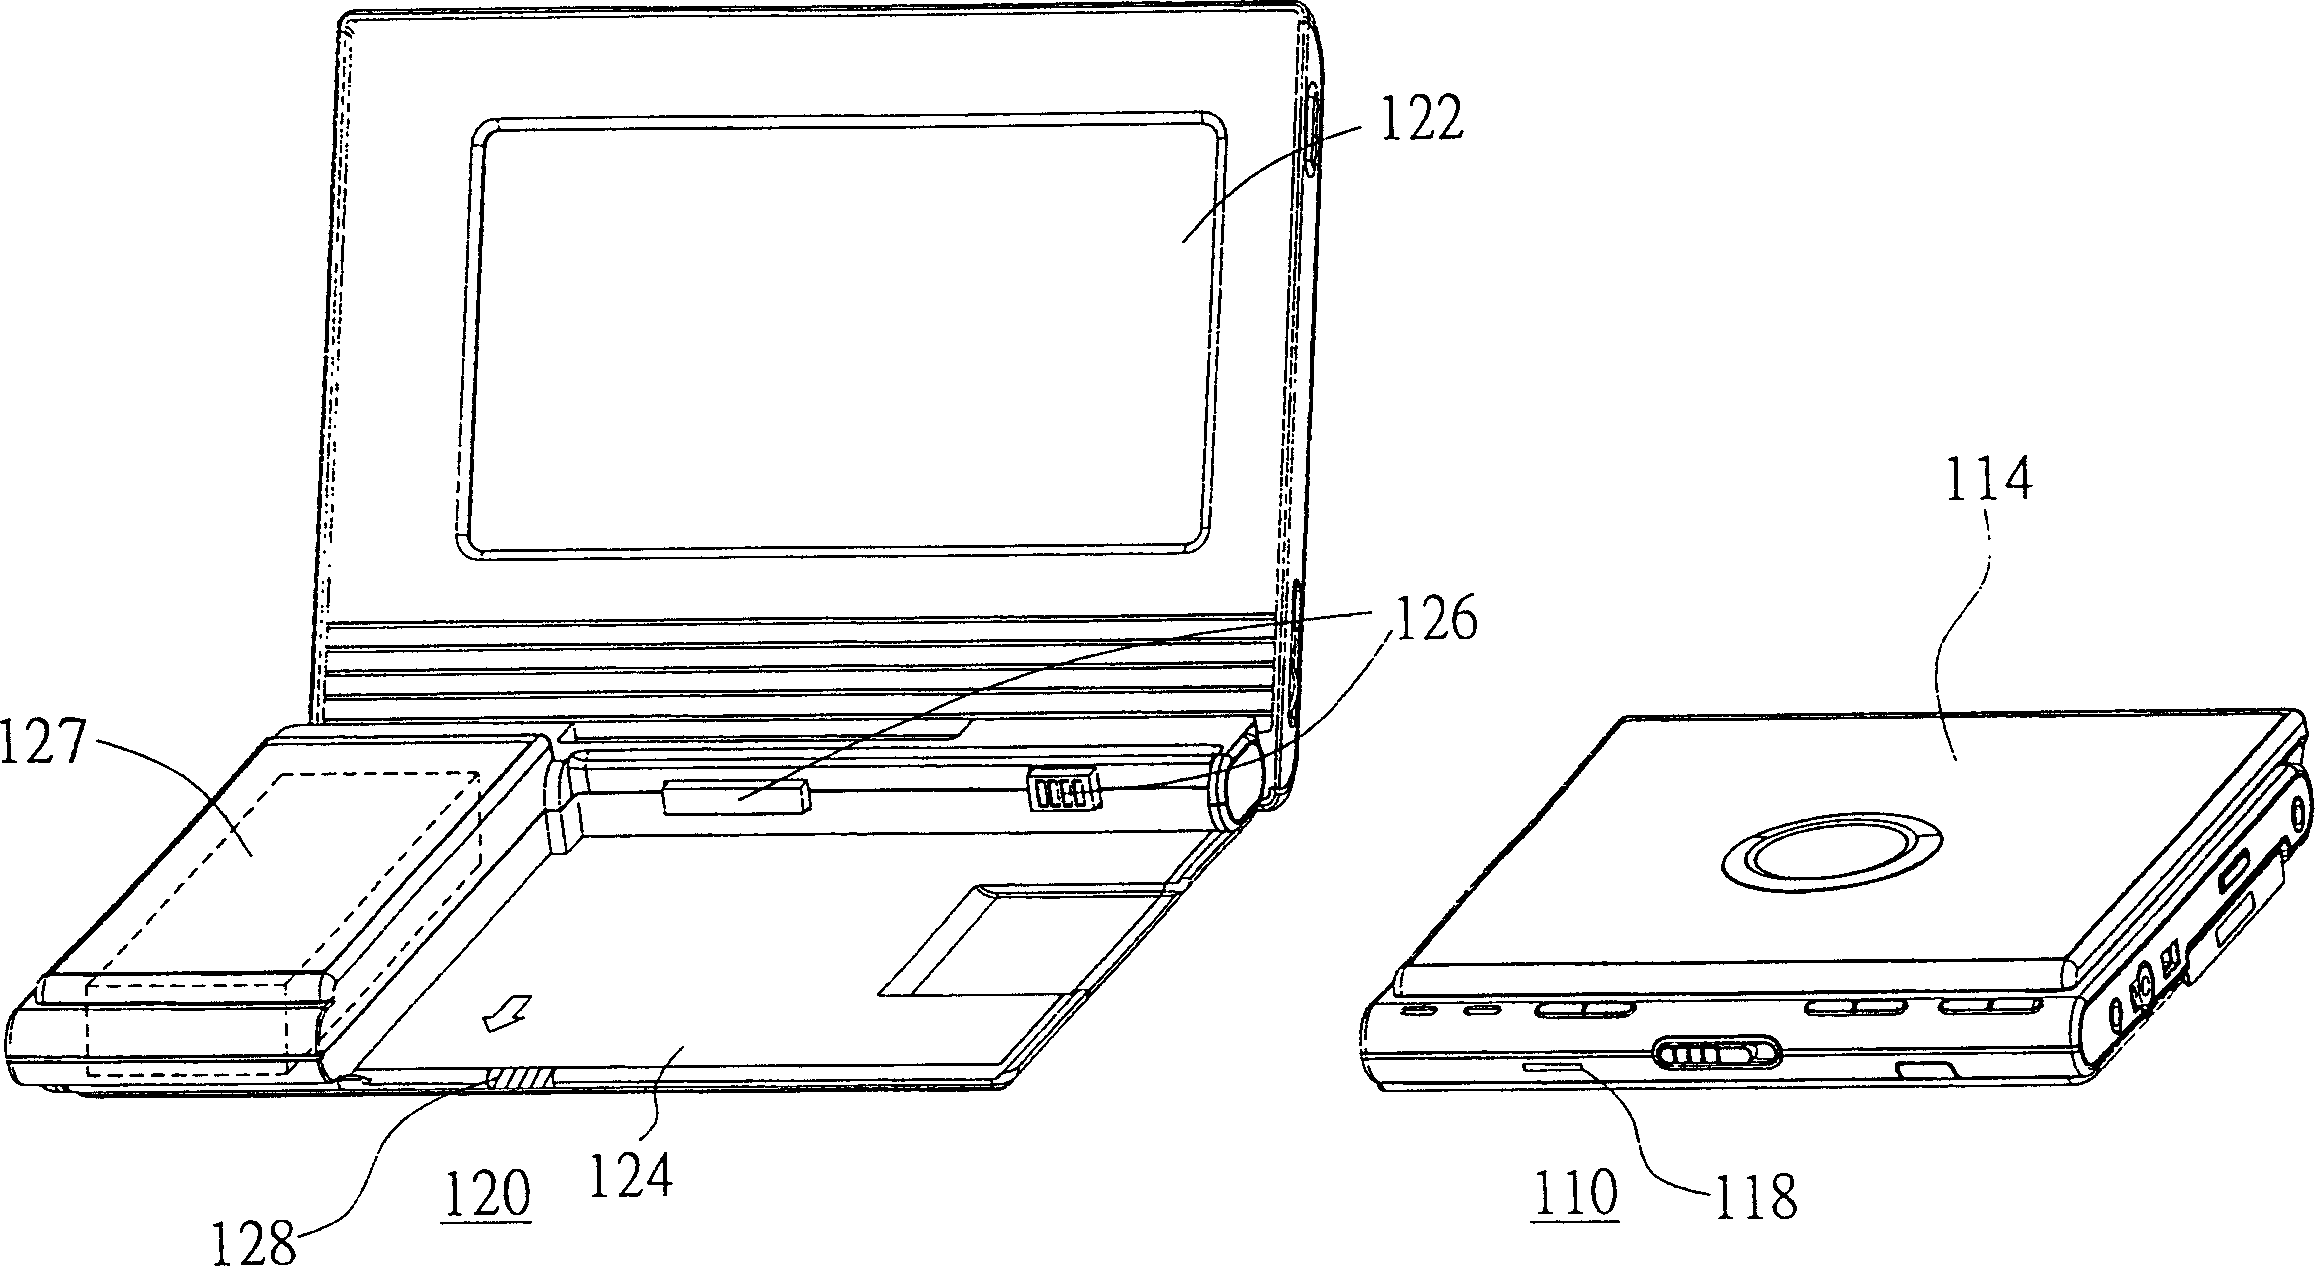 Audio-visual broadcasting displaying device with media access assembly separation